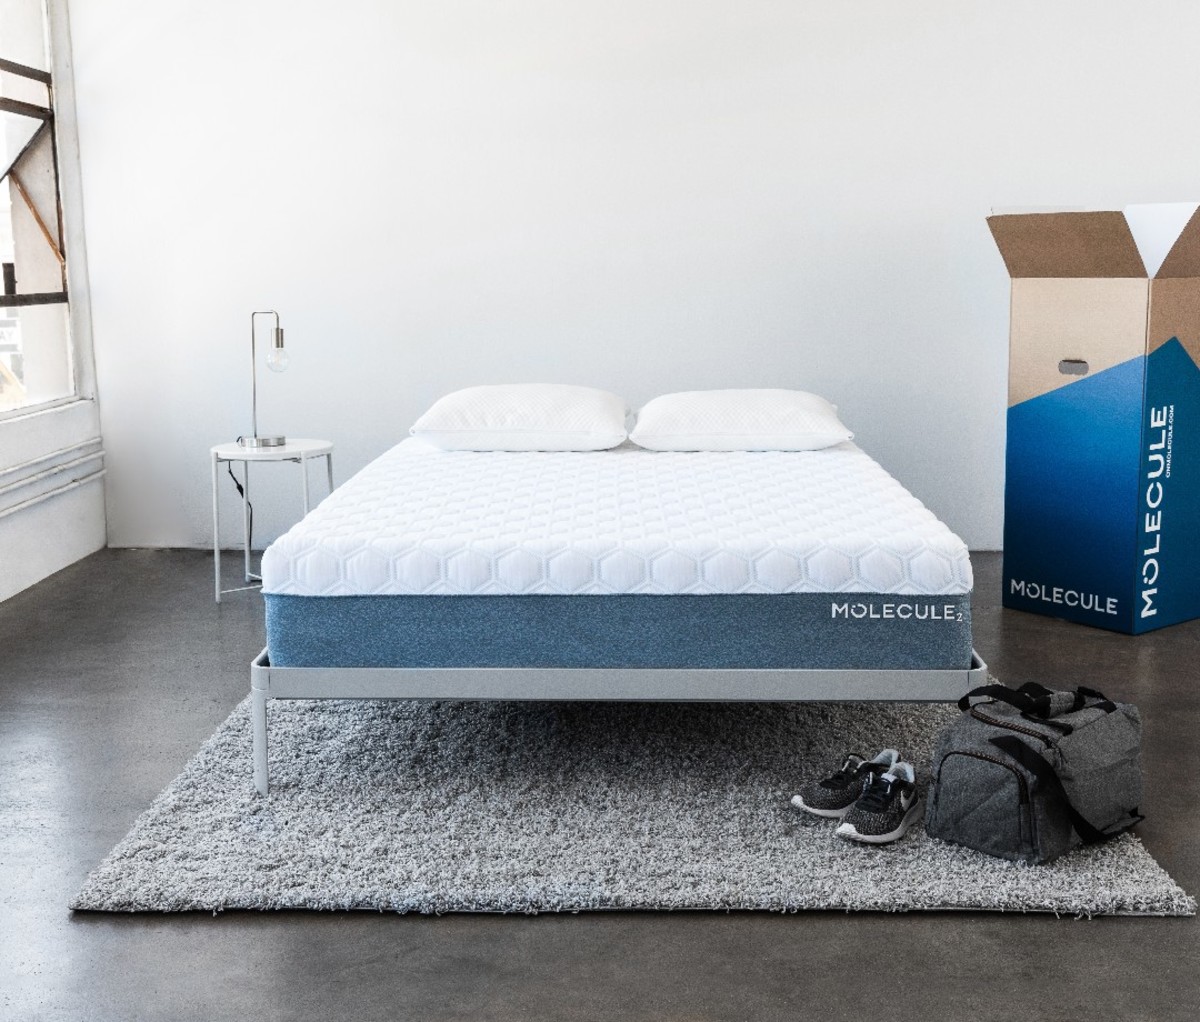 An image of a Molecule 2 AirTEC Mattress With Microban on a bed frame.